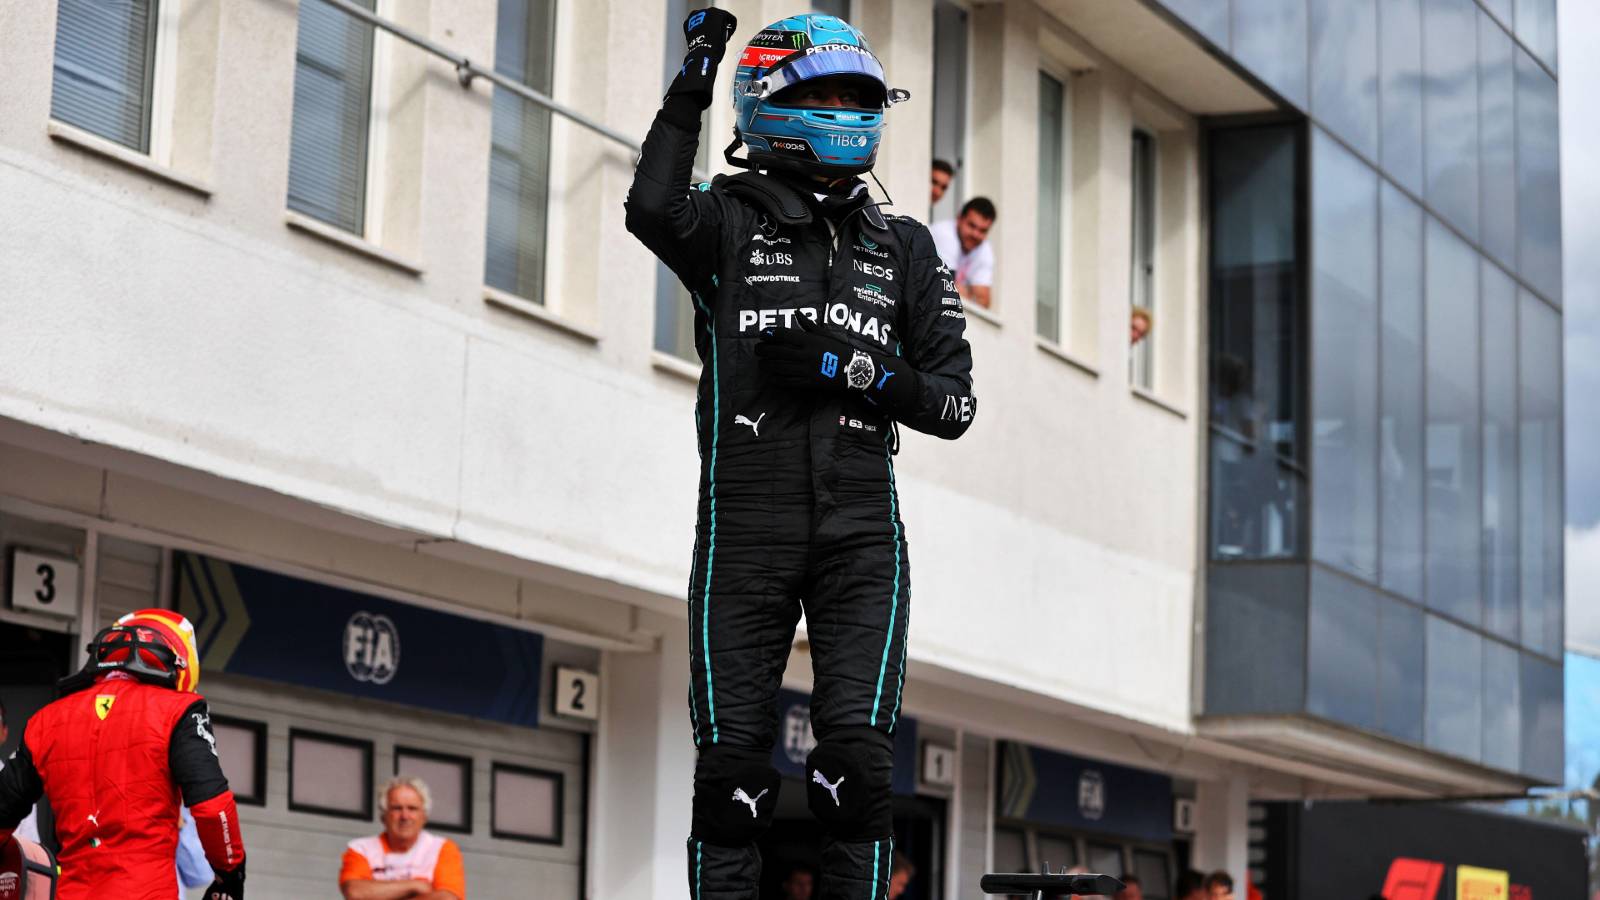 George Russell celebrates pole position for the Hungarian GP. Hungaroring July 2022.